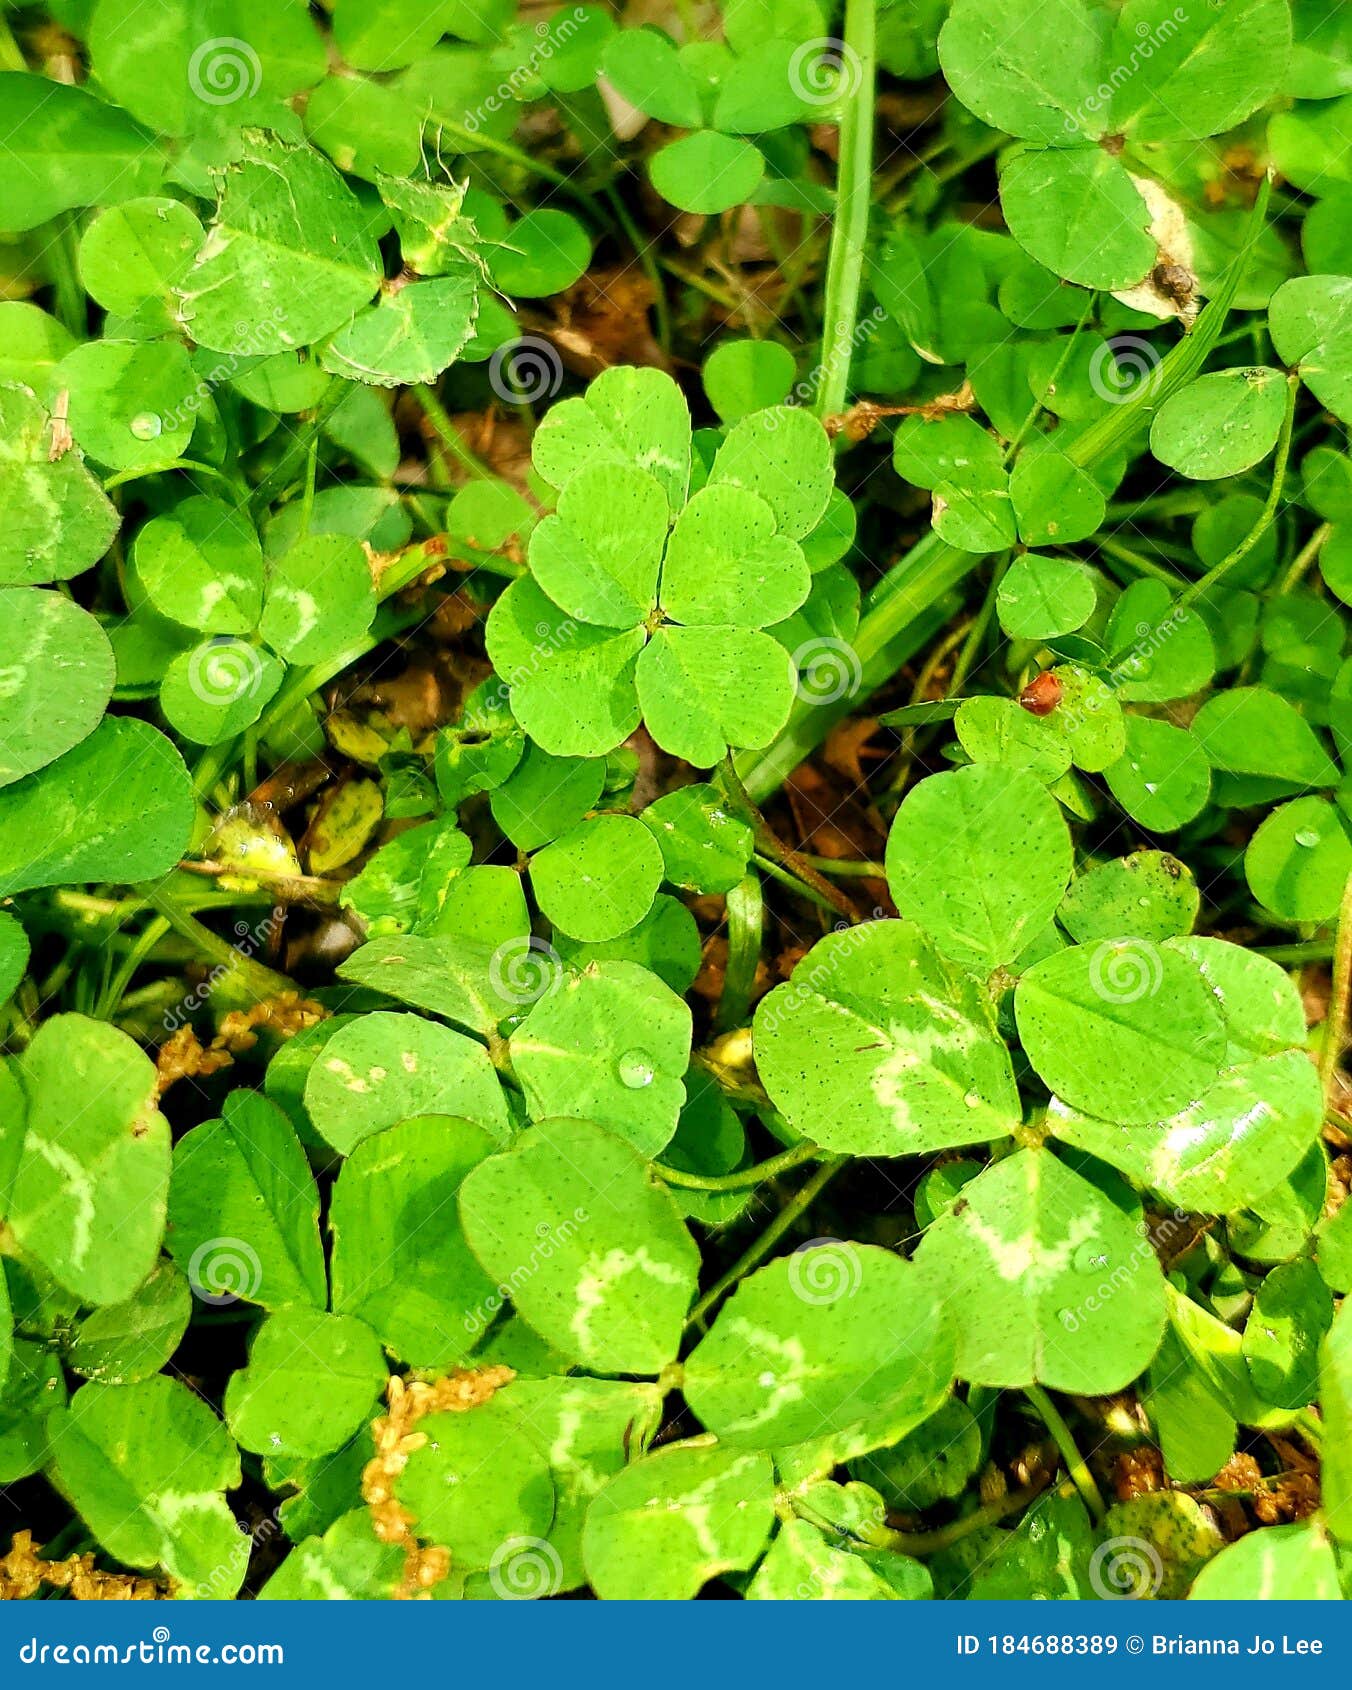 four leaf clover definitely making itself noticable